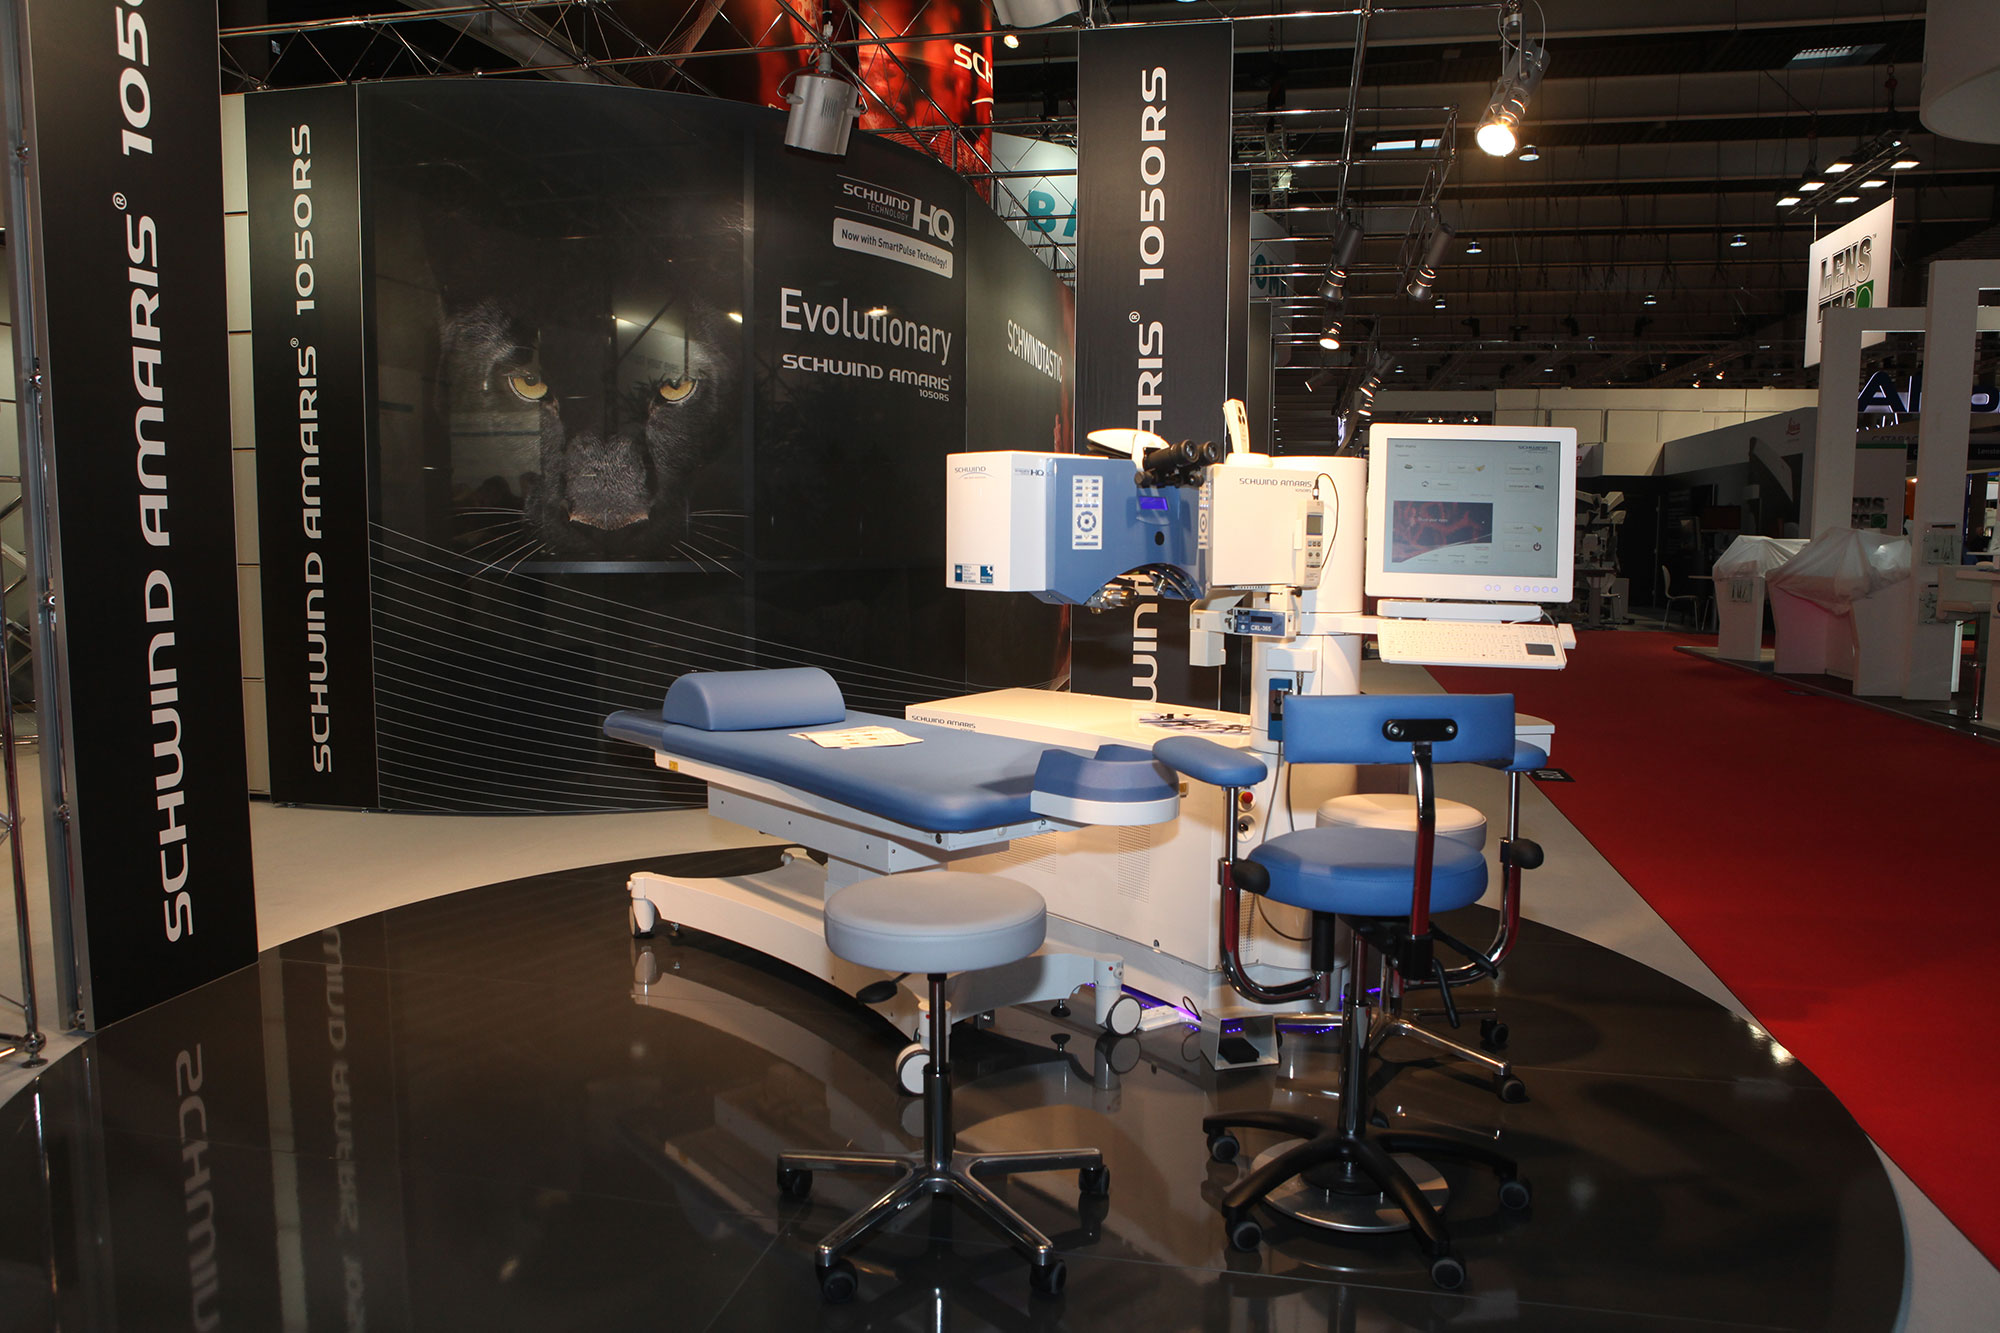 Exhibition stand of Schwind at the ESCRS 2015